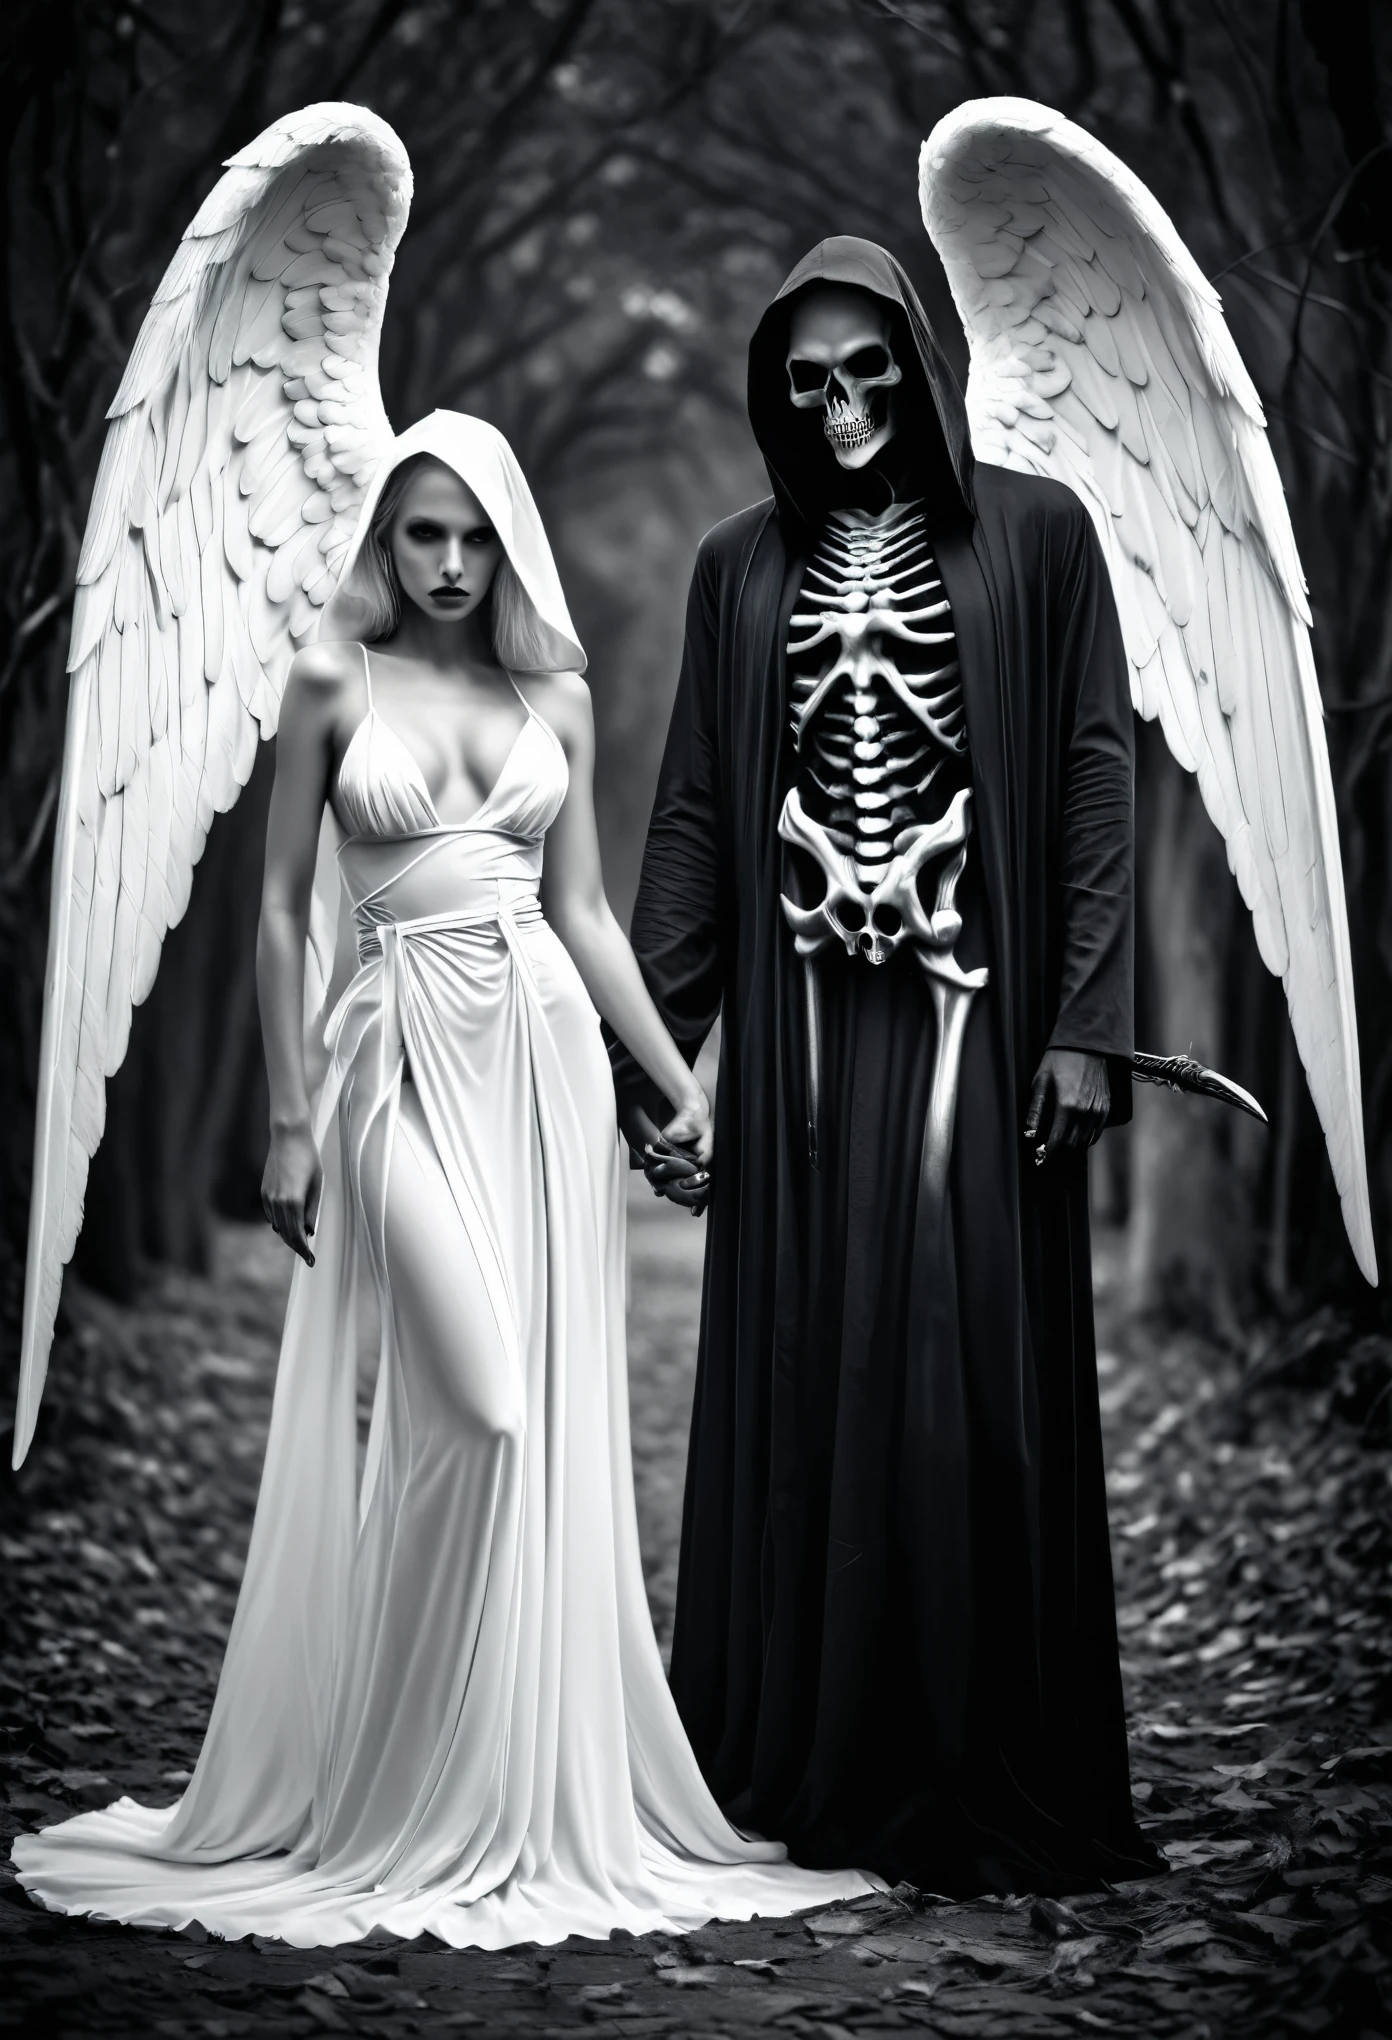 Confrontation of black and white, symmetrical composition, a evil Black Grim Reaper and a divine pure white female angel